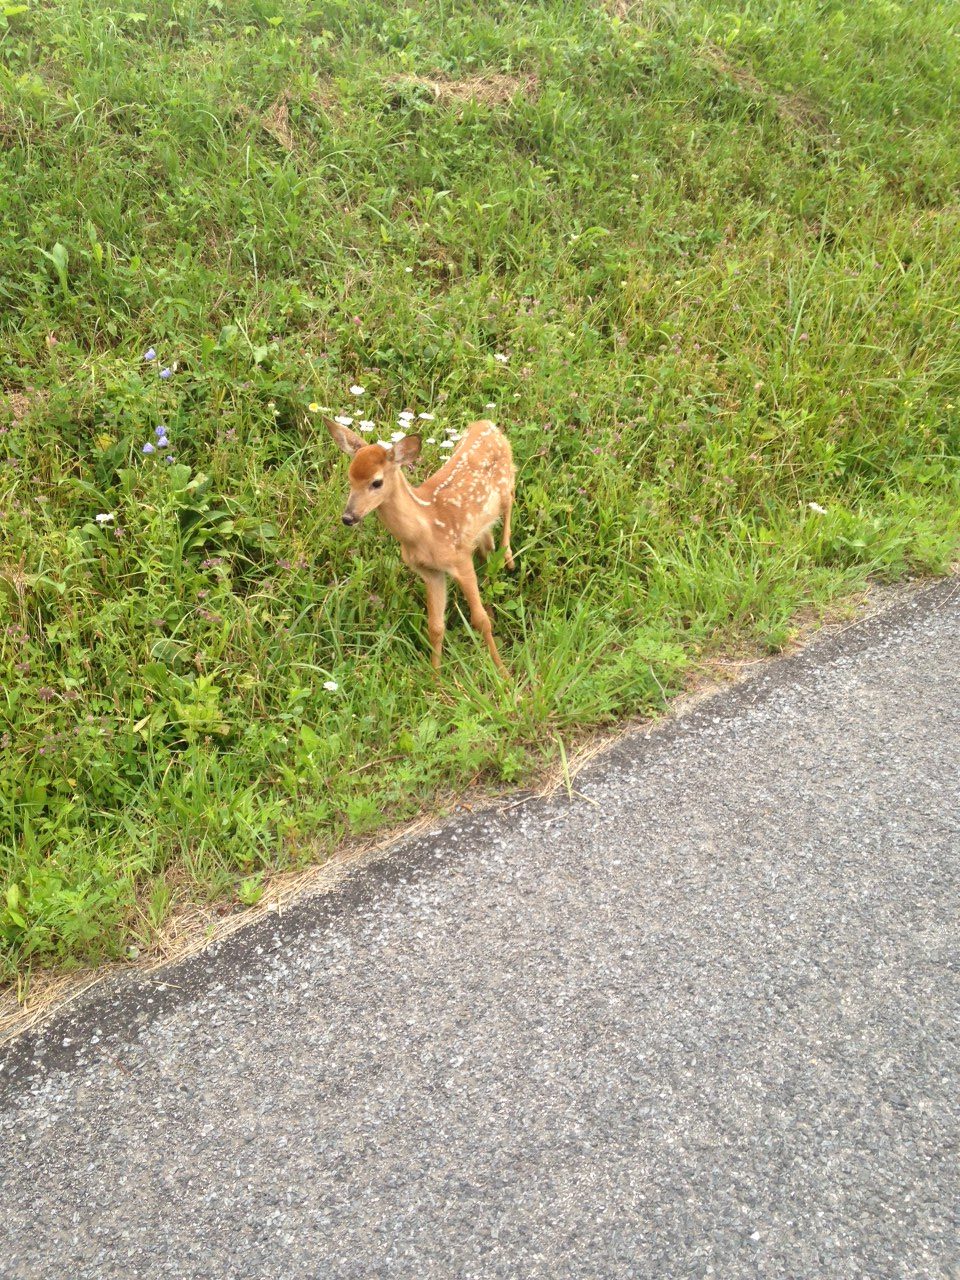 Fawn standing on side of paved road